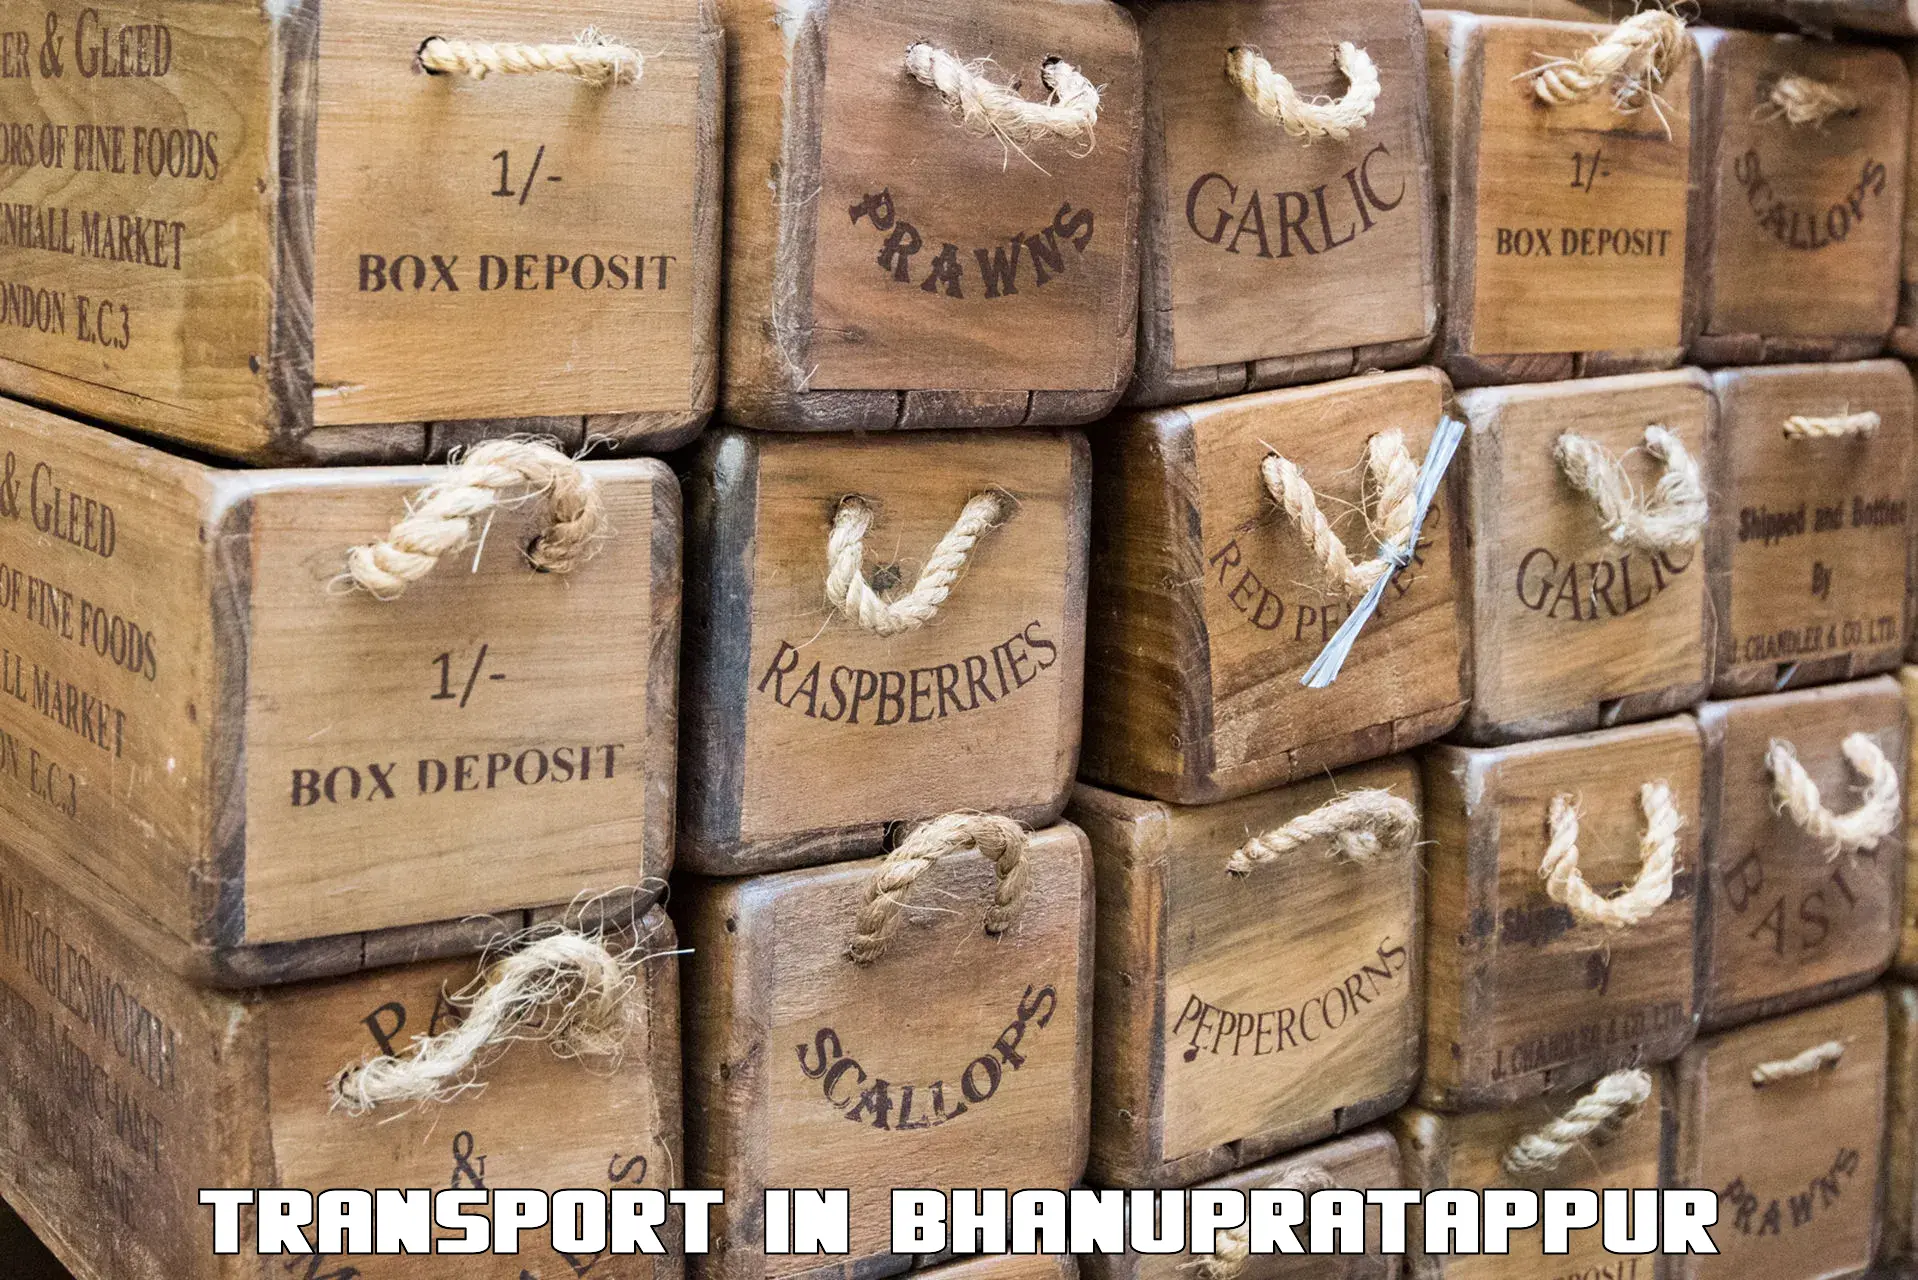 Daily transport service in Bhanupratappur